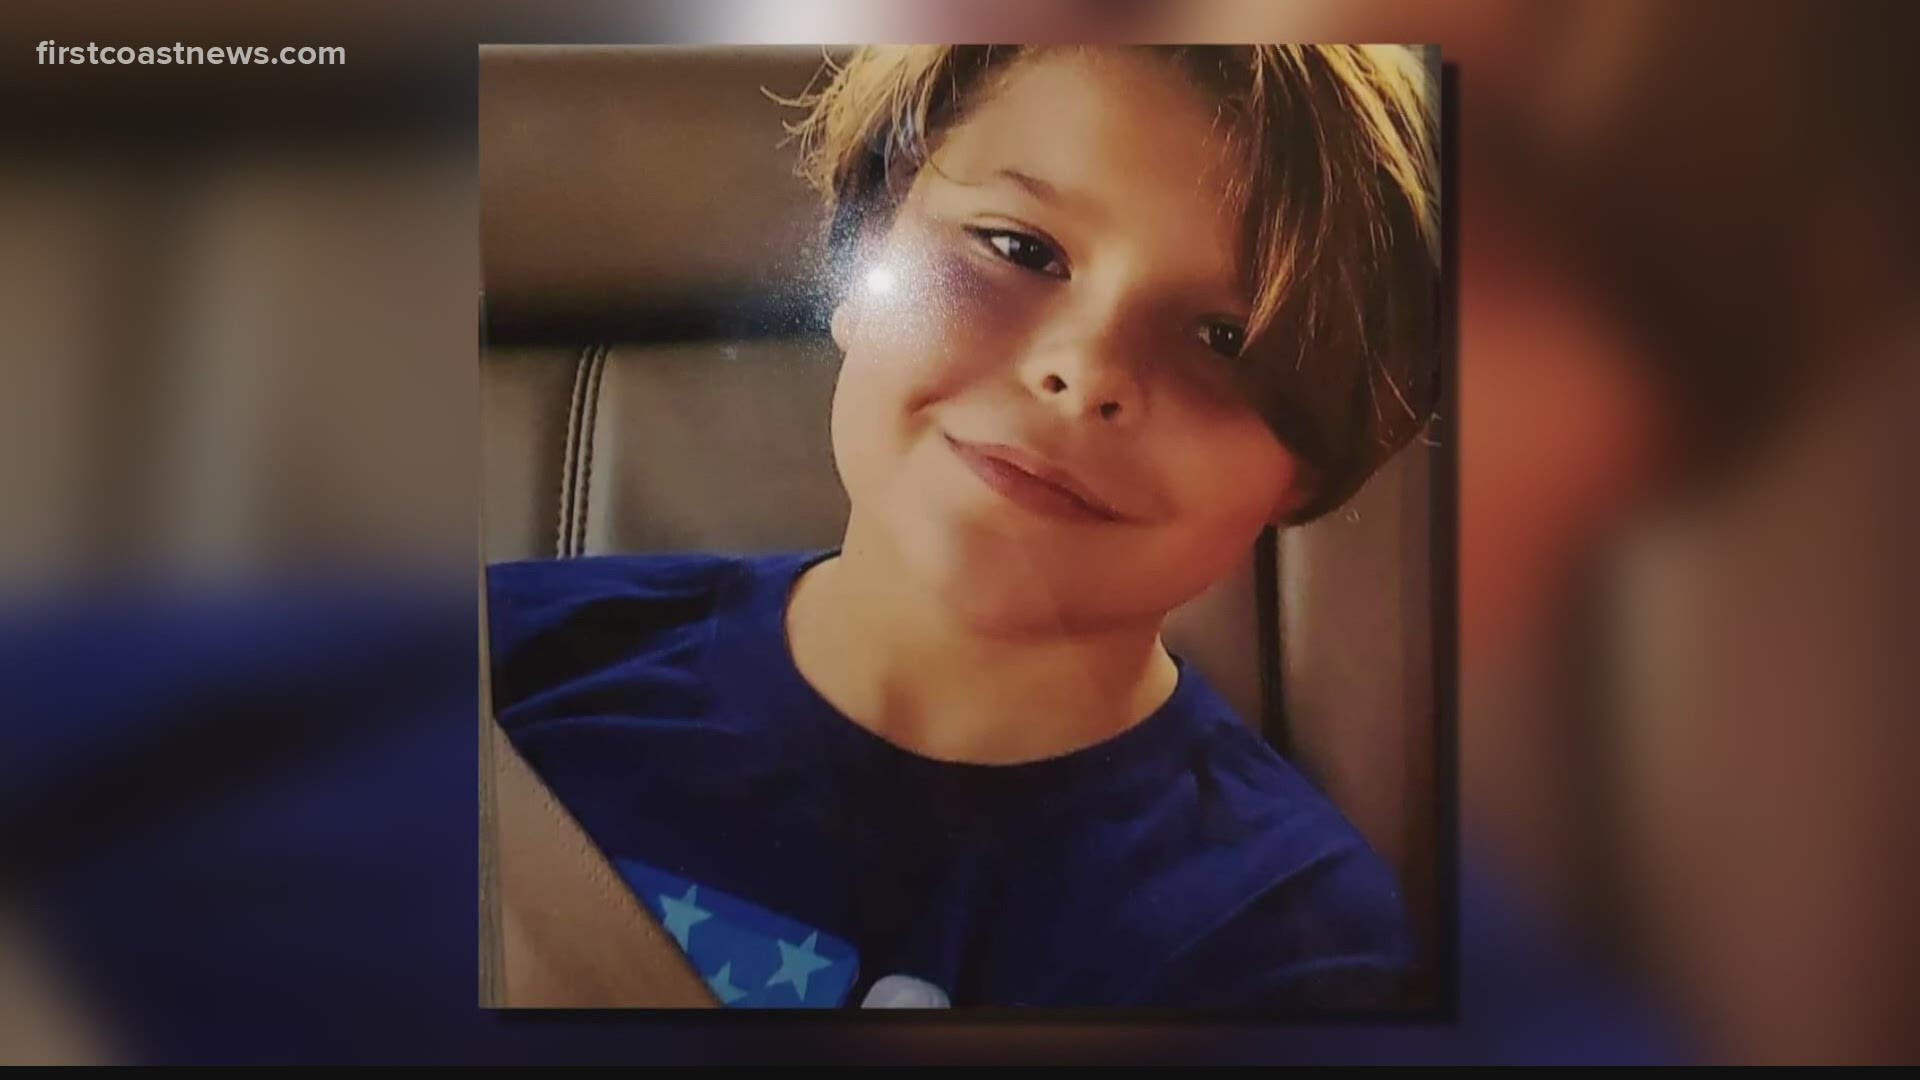 A report says Rylan Wise may have been dead between 12 - 24 hours before his father called the police.